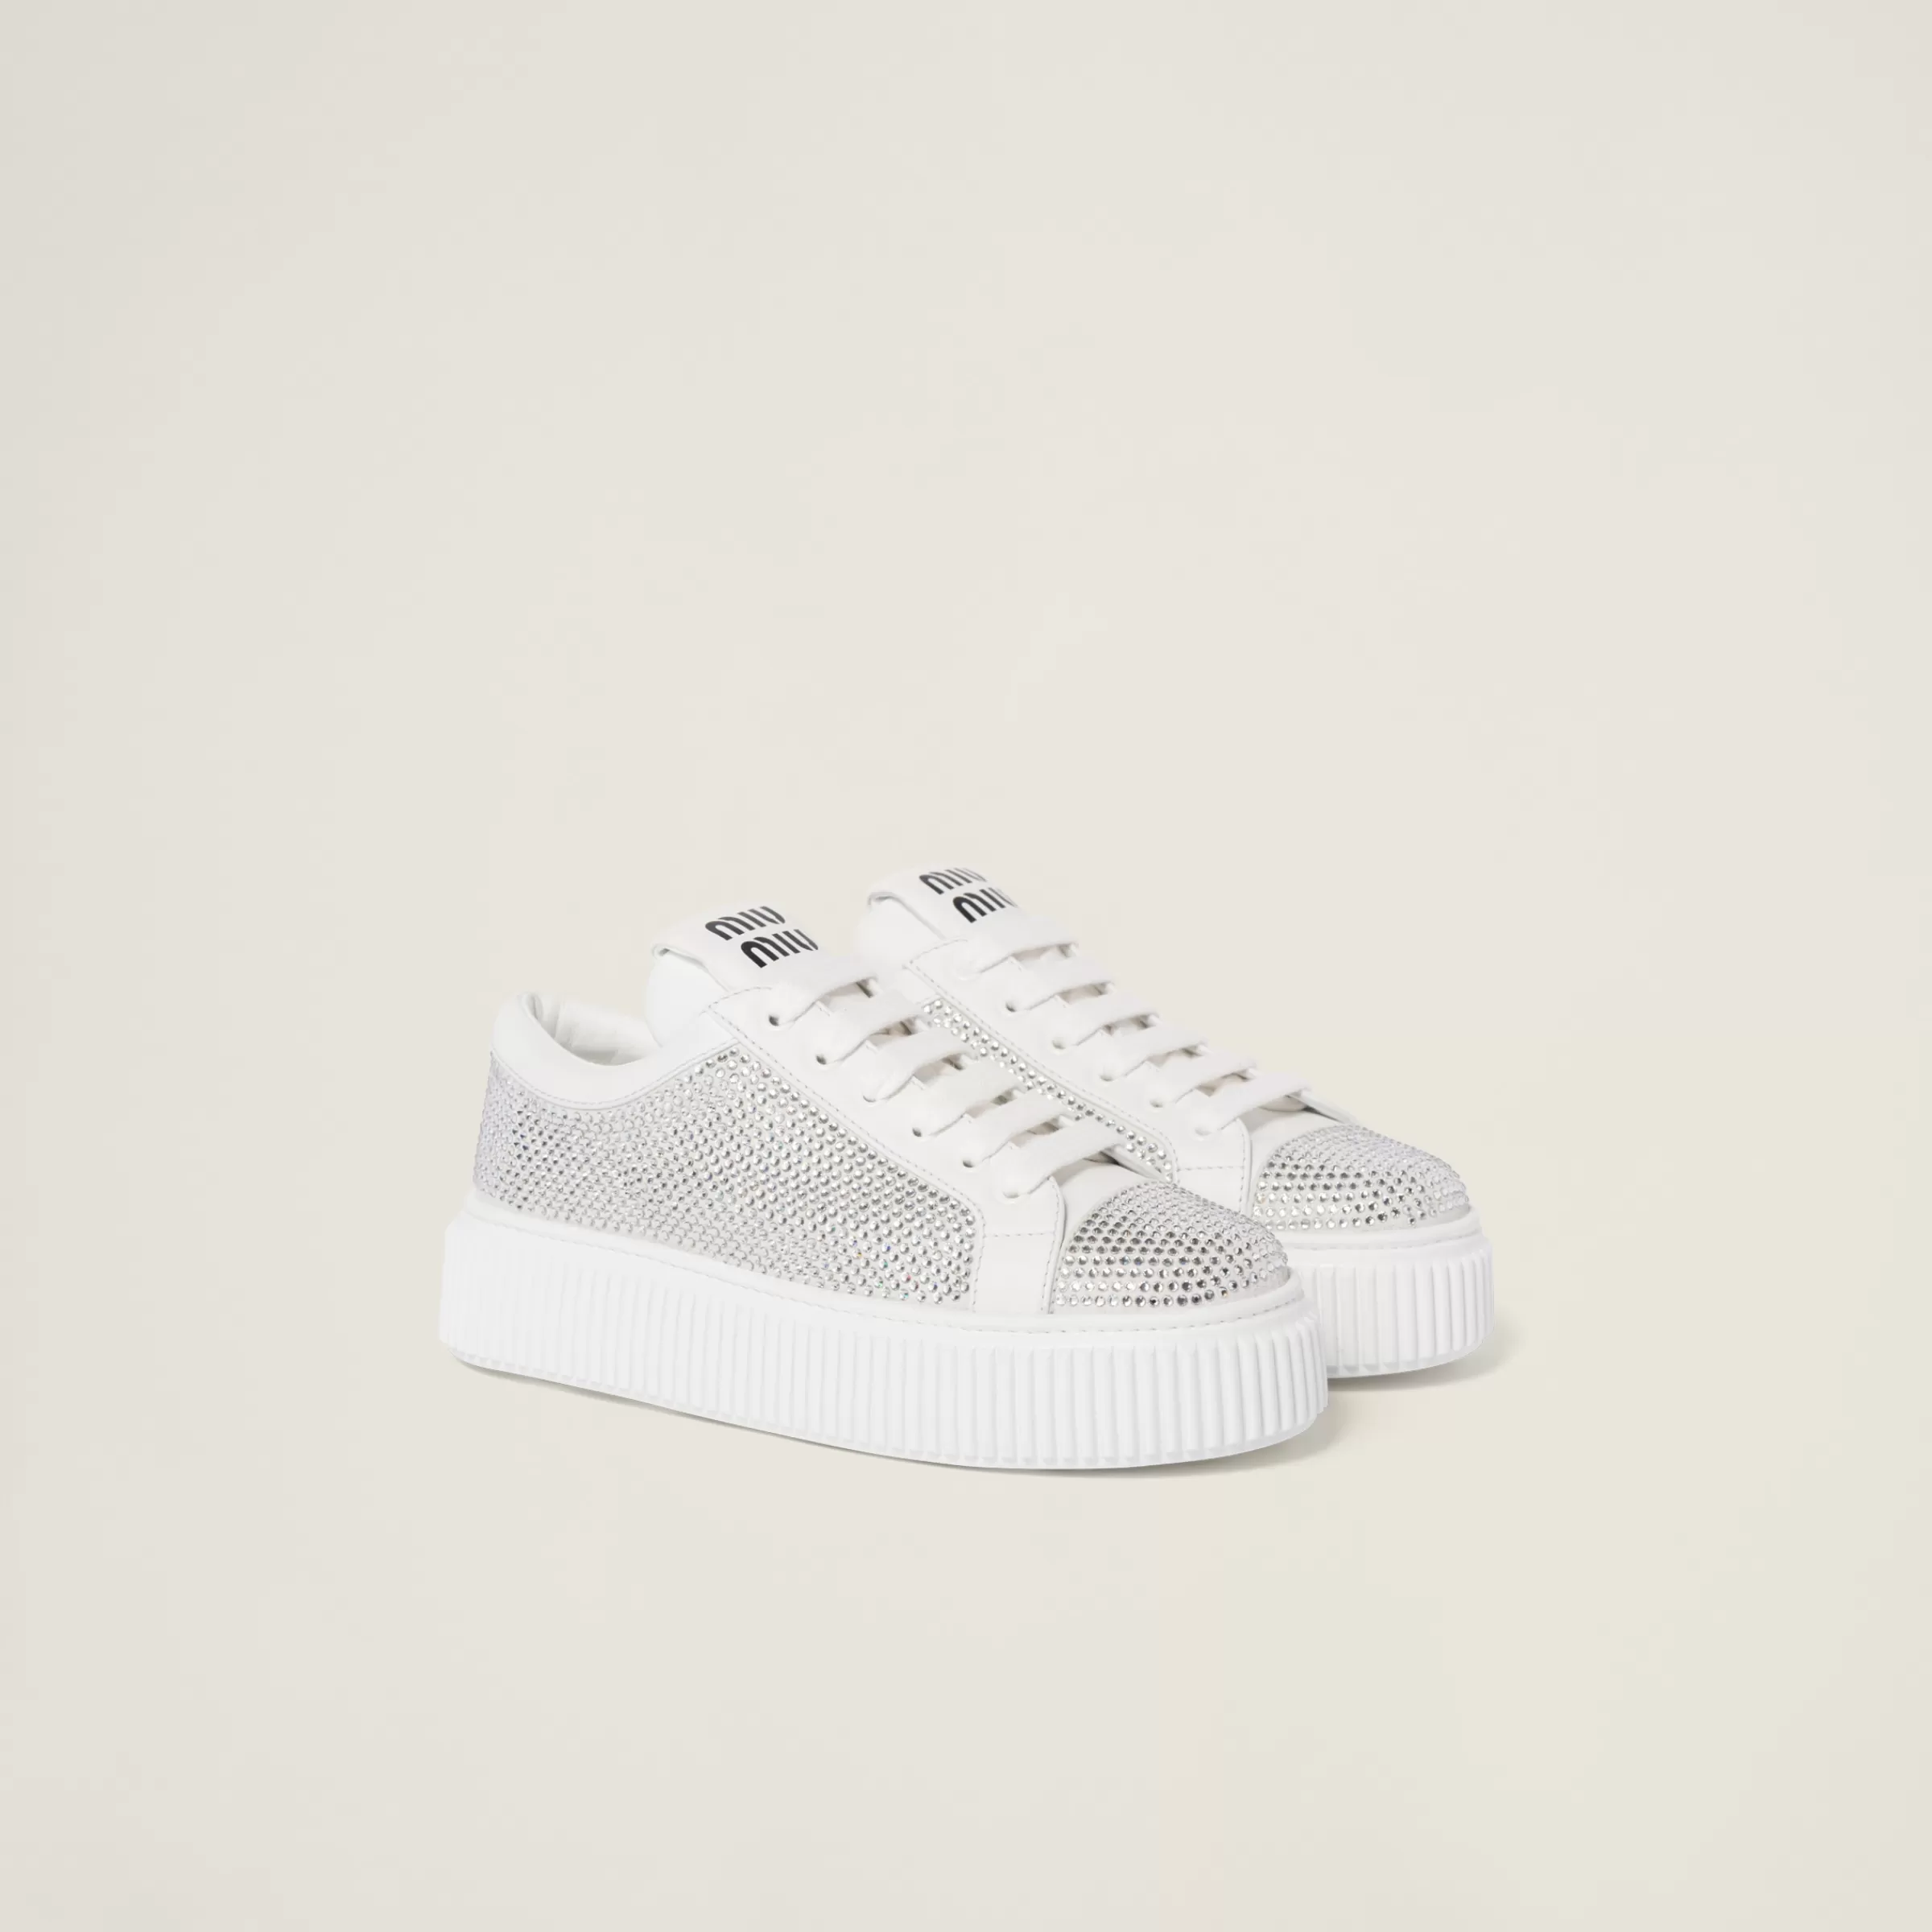 Miu Miu Suede And Smooth Leather Sneakers |